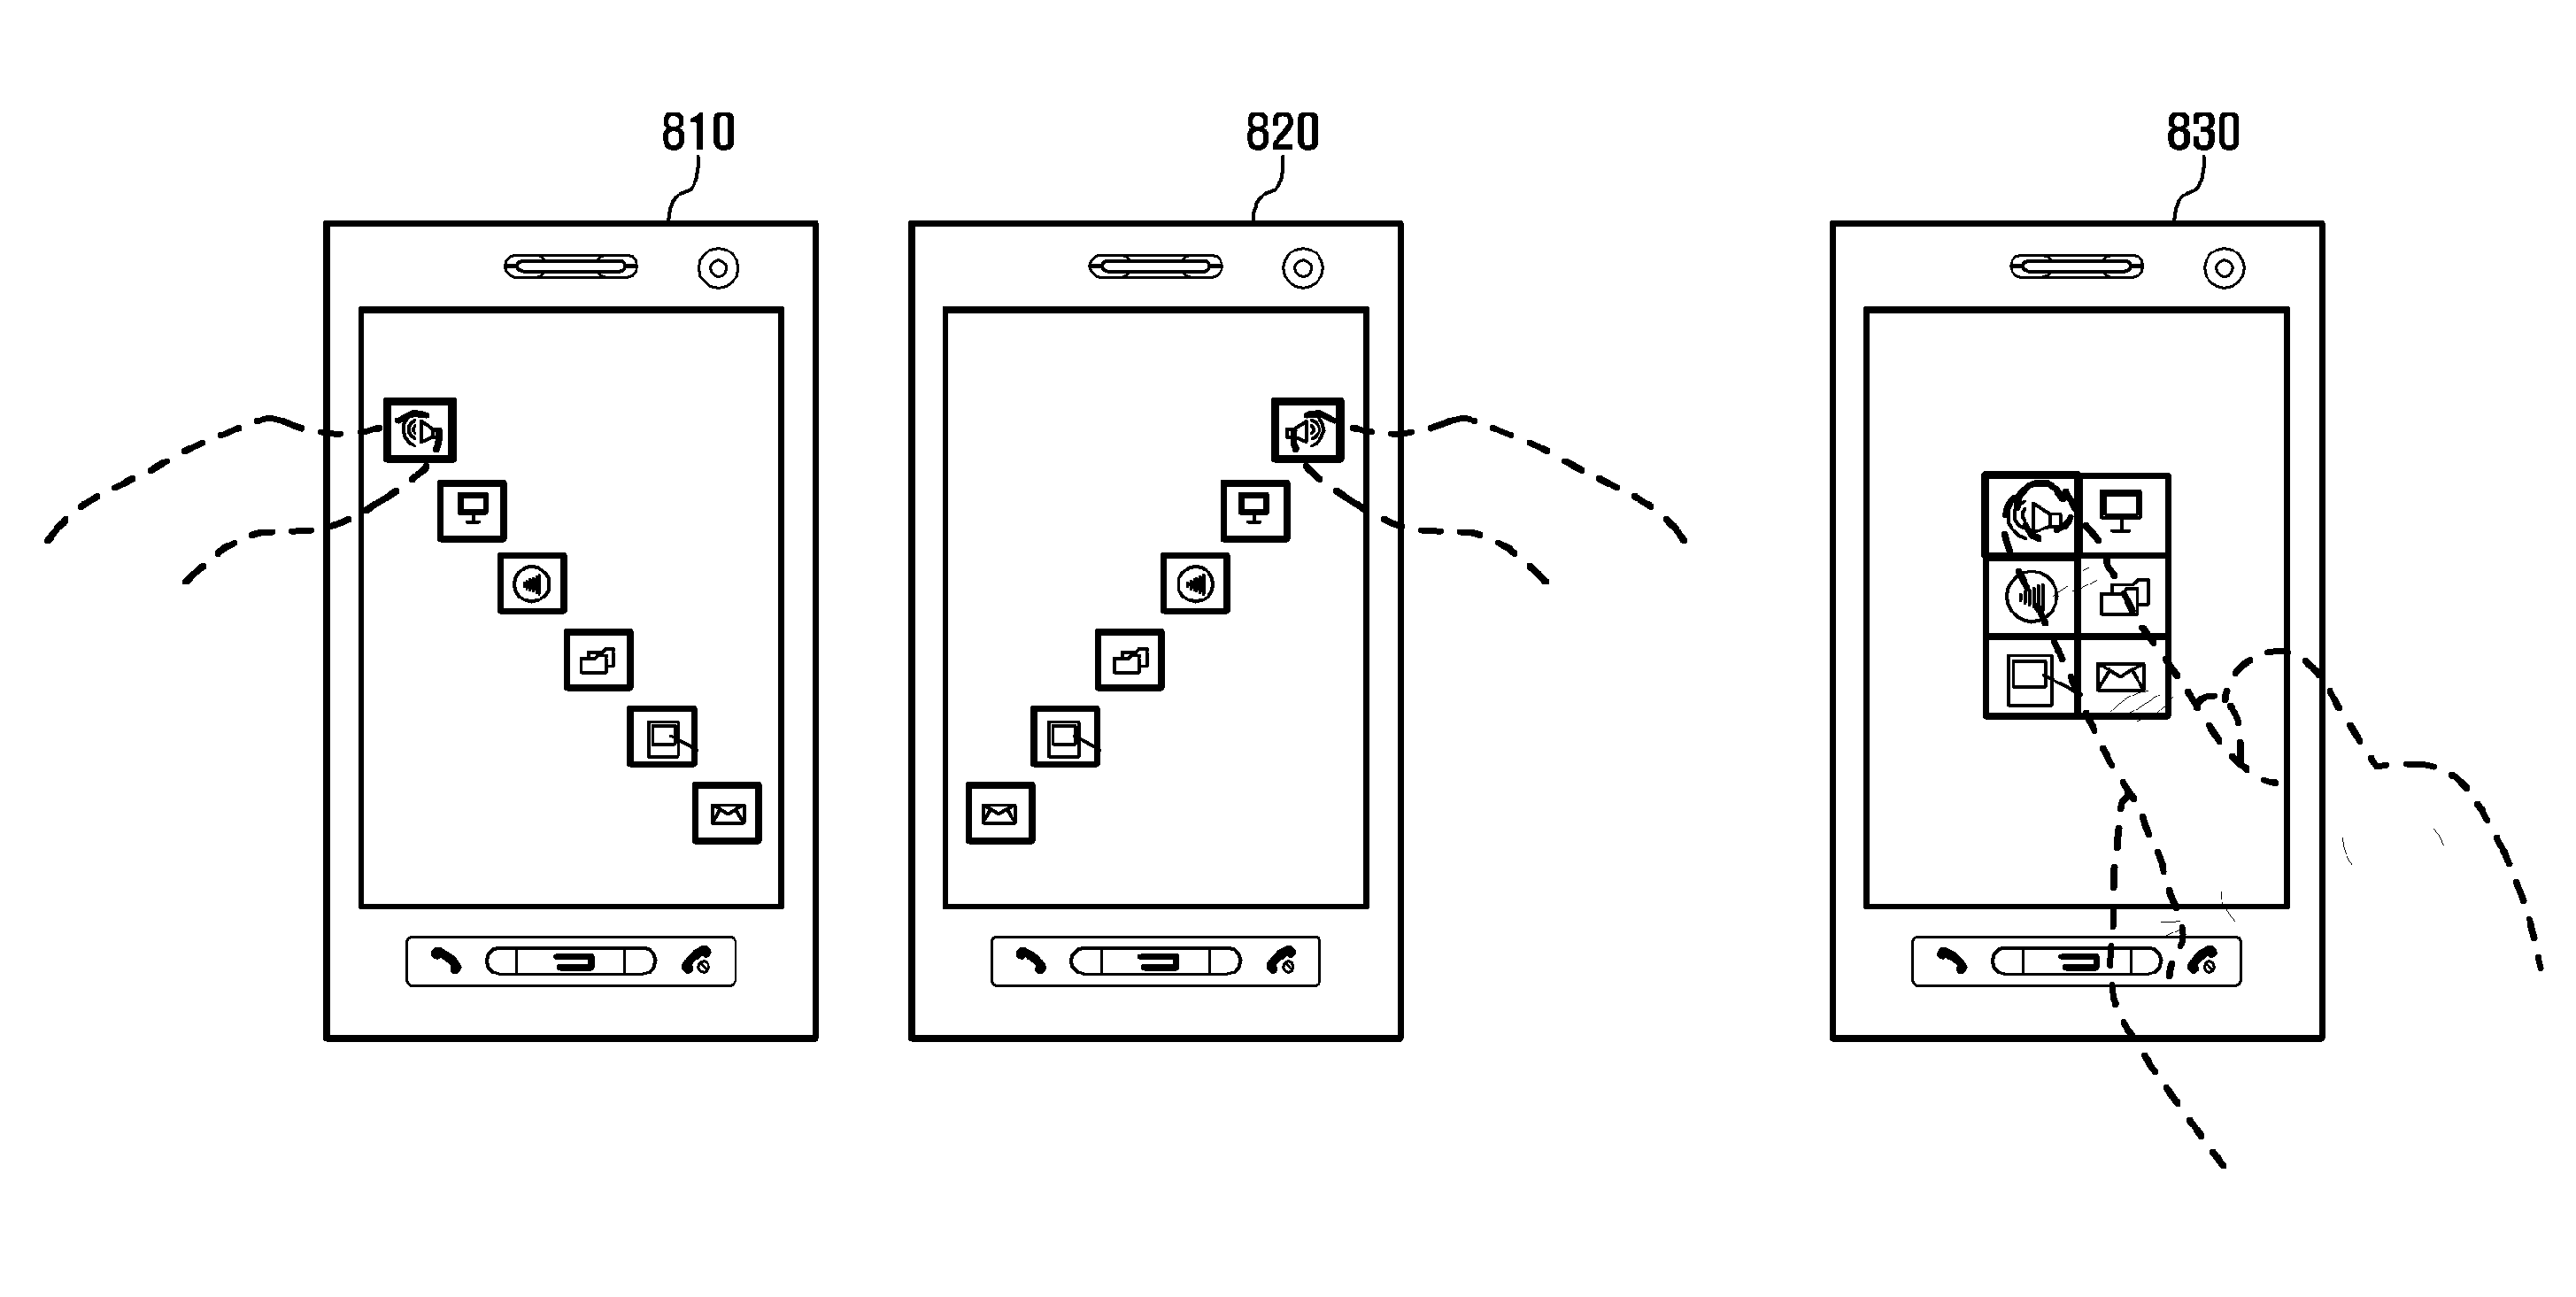 Method and apparatus for displaying graphical user interface depending on a user's contact pattern